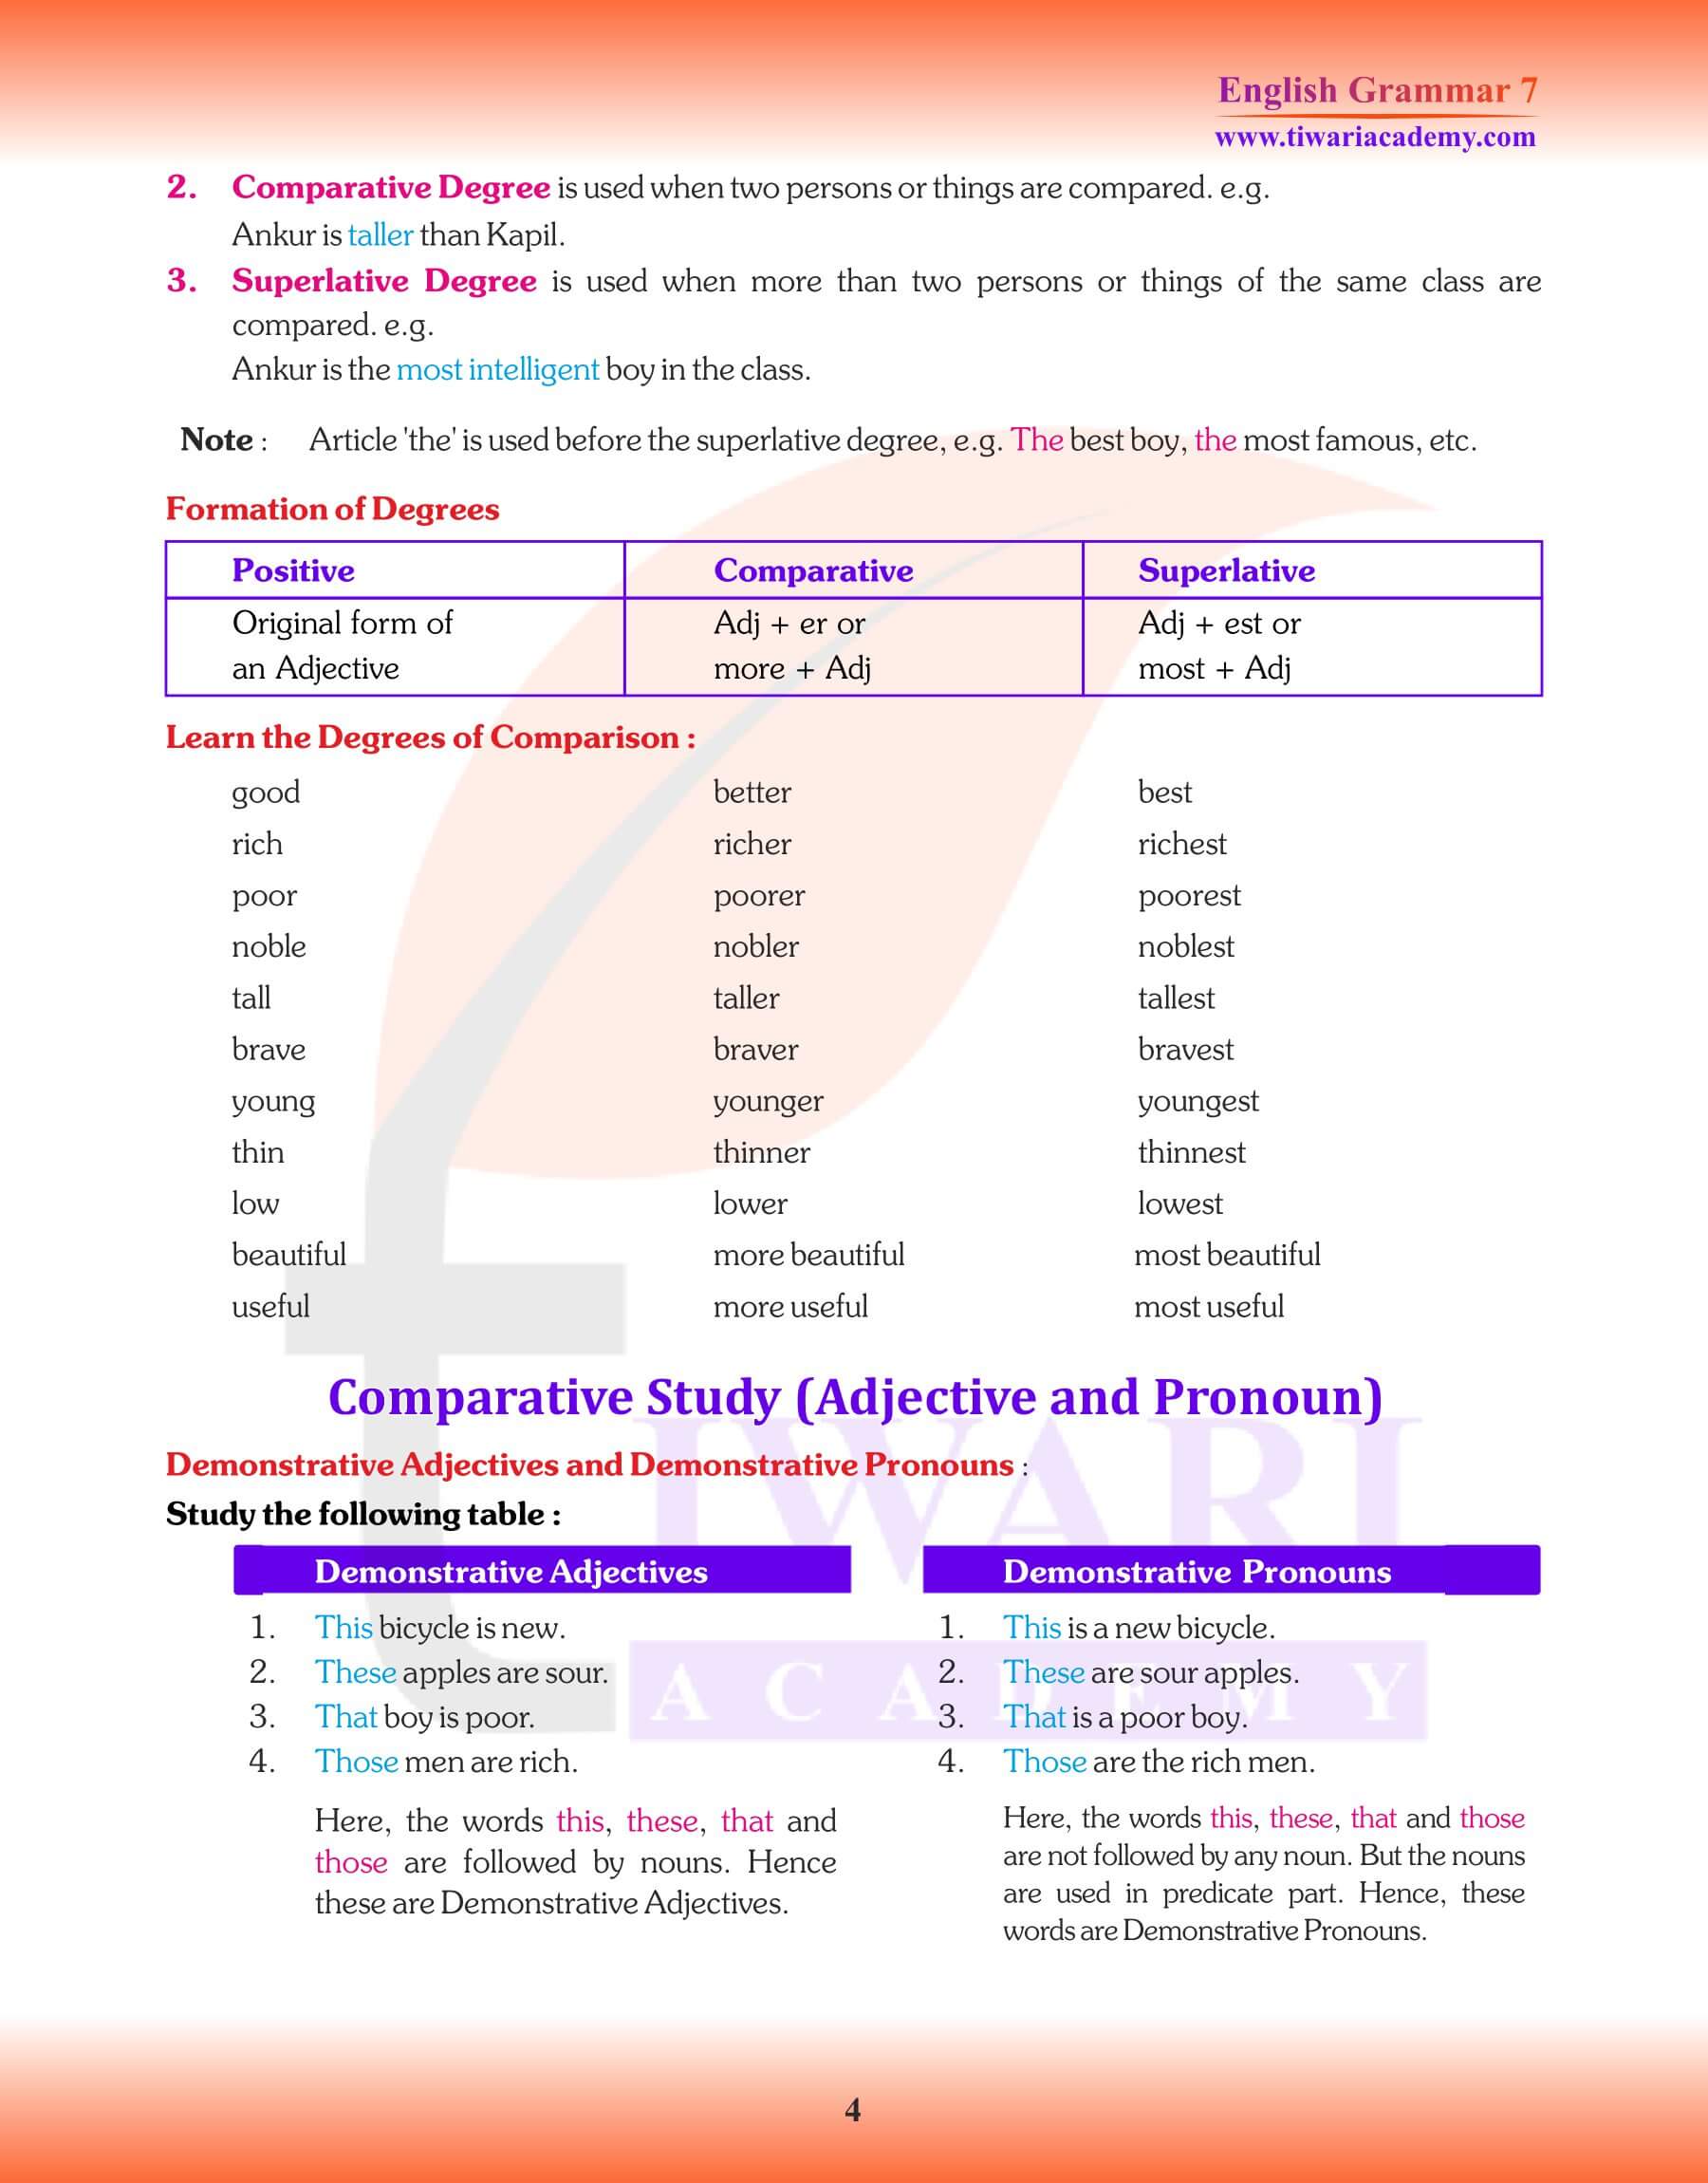 Class 7 English Grammar Chapter 7 Revision notes